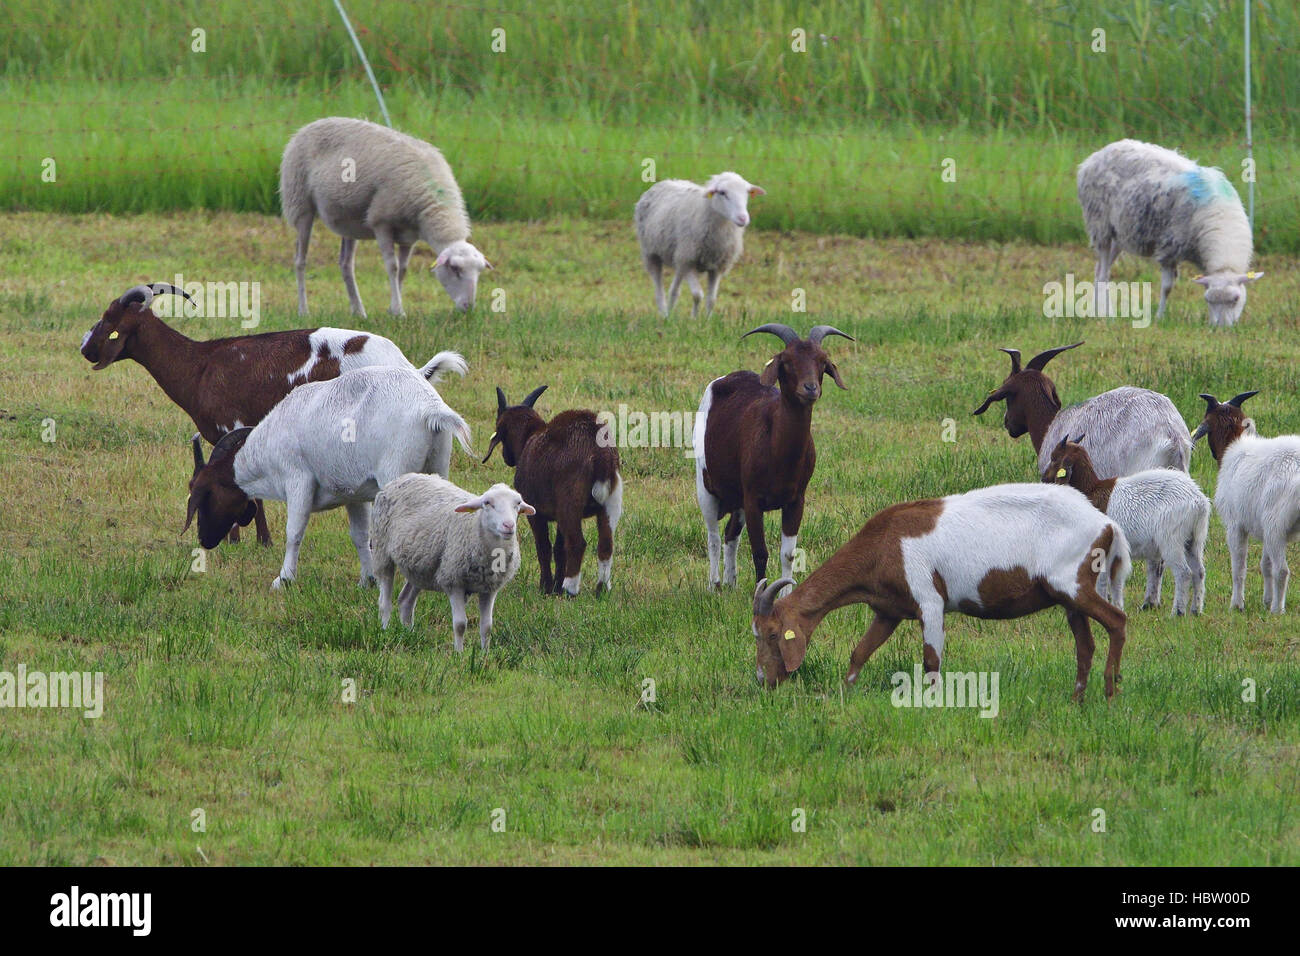 White Polled Heath and Boer goat Stock Photo